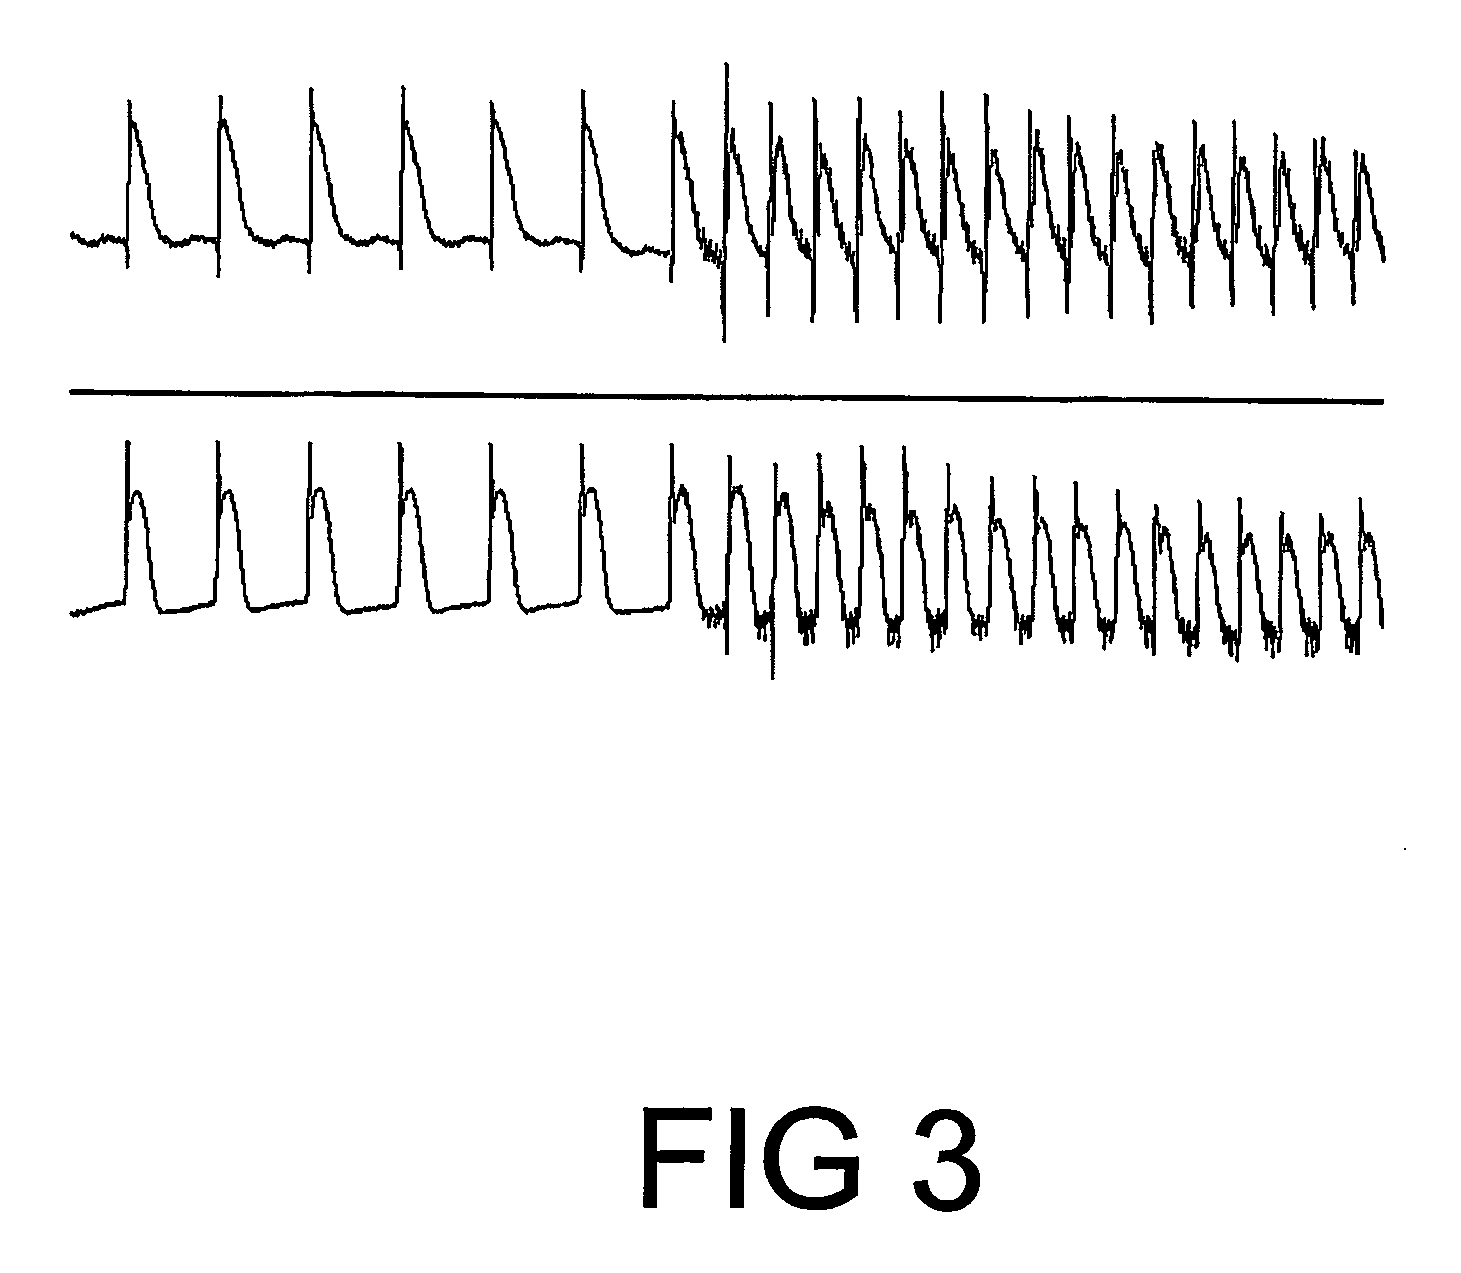 Pharmeceutical composition comprising plant material or trichilia sp. alone or in association with other plant extracts for the reversion/combat and/or prevention of ventricular fibrillation